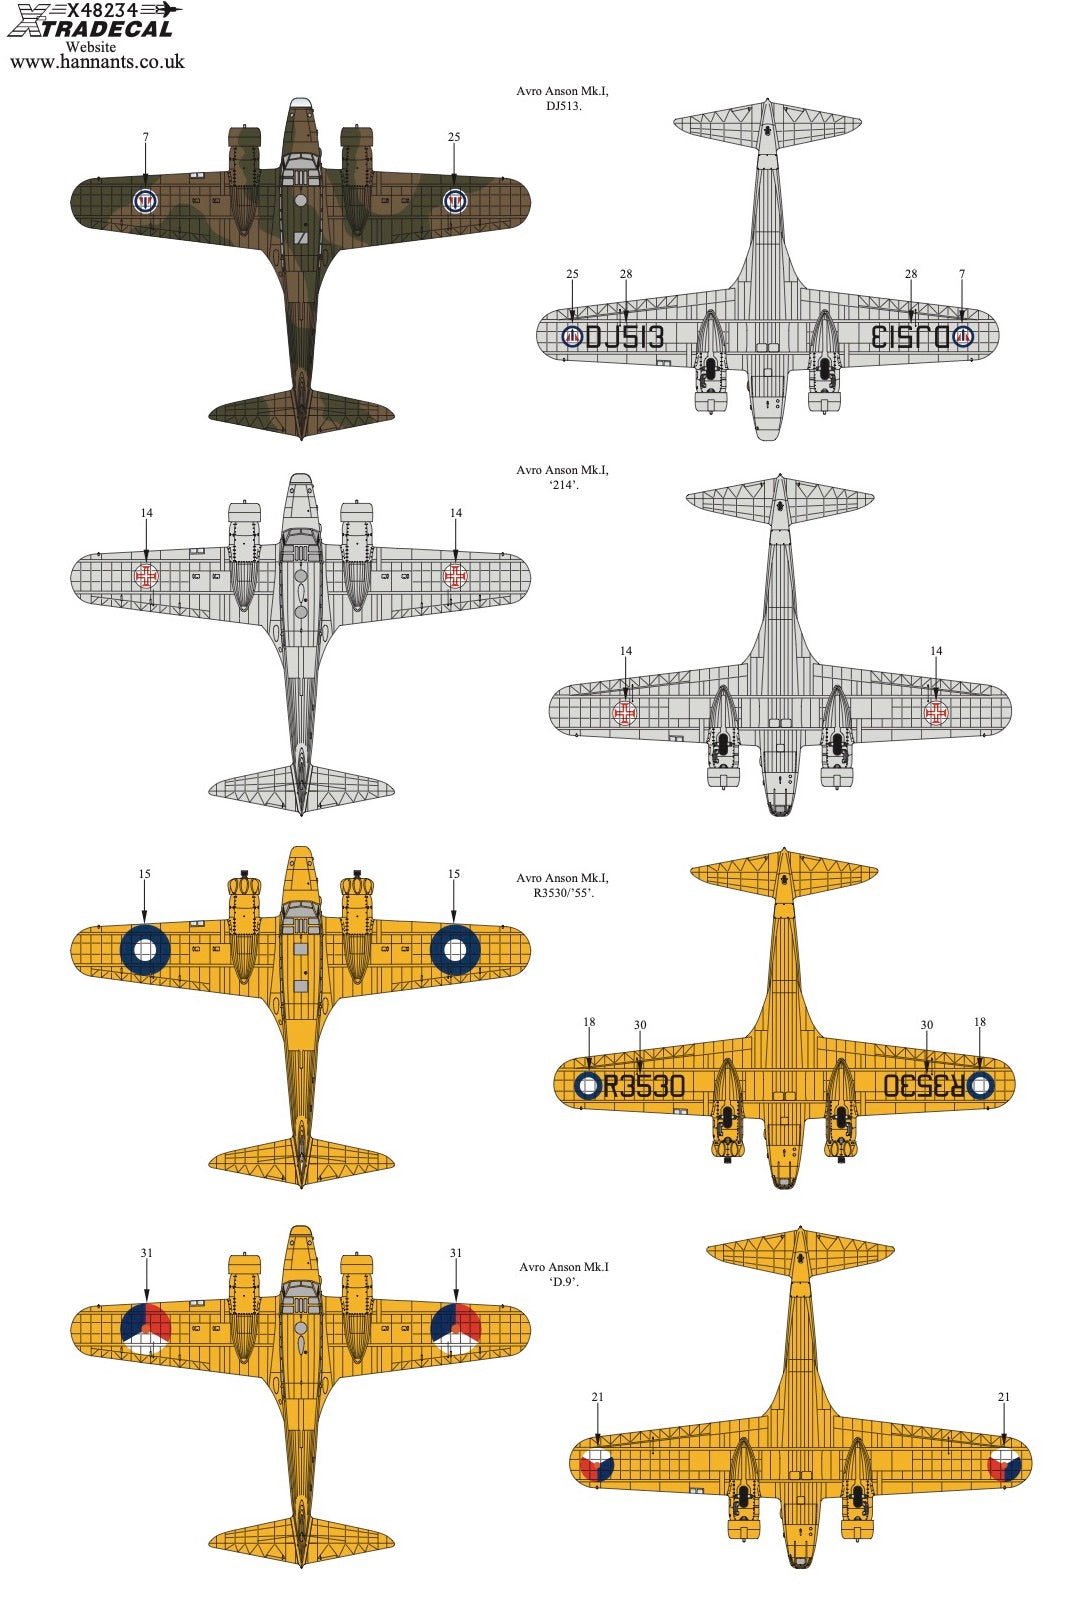 Xtradecal X48234 Avro Anson Mk.I Collection Part 4 1/48